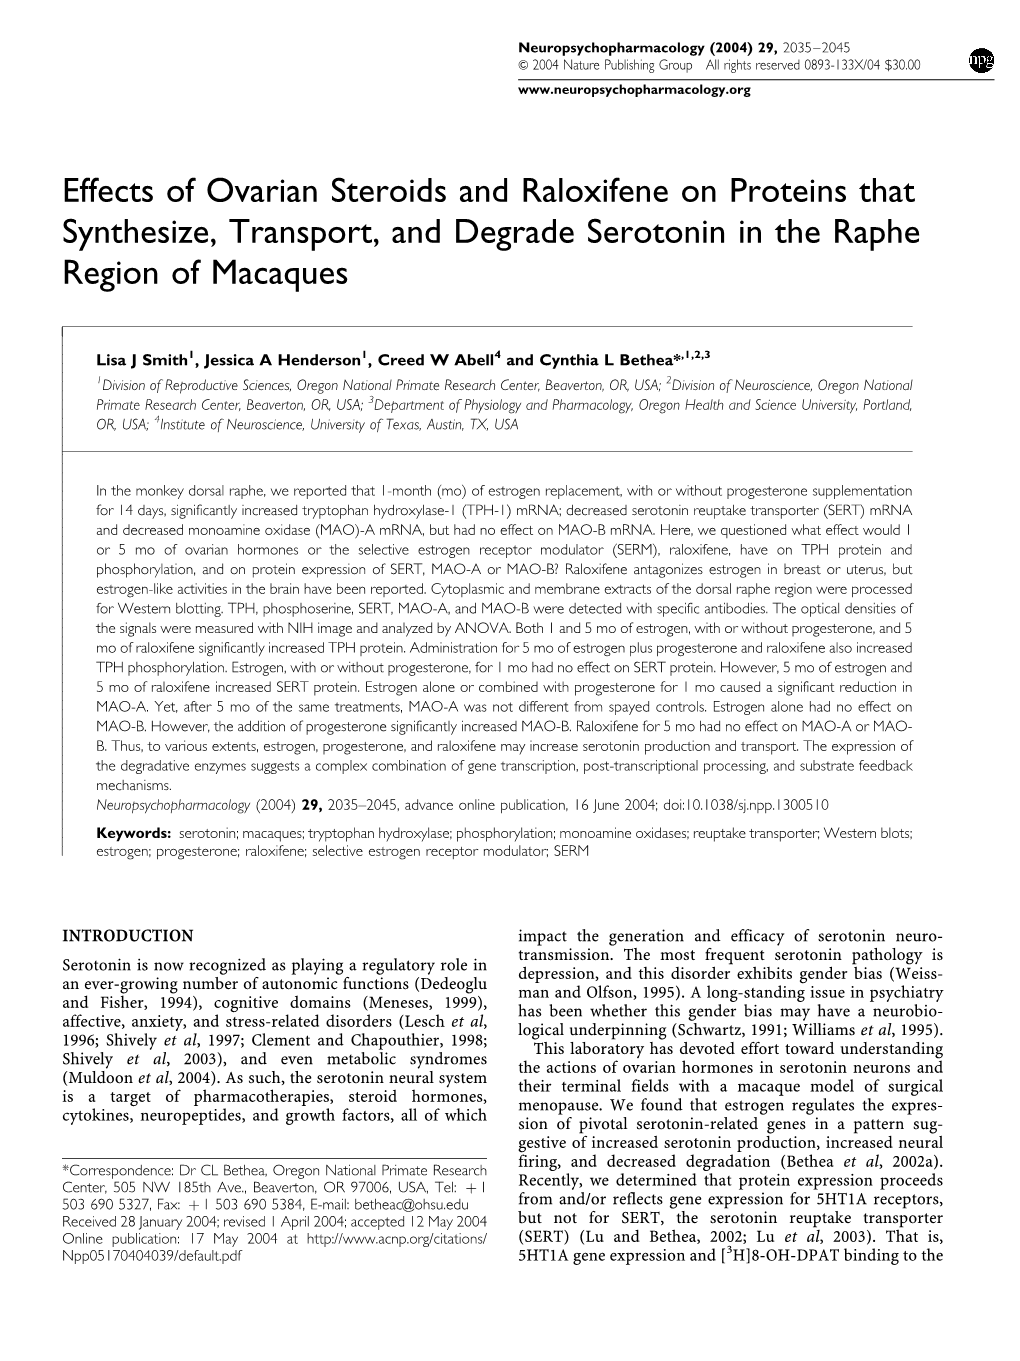 Effects of Ovarian Steroids and Raloxifene on Proteins That Synthesize, Transport, and Degrade Serotonin in the Raphe Region of Macaques